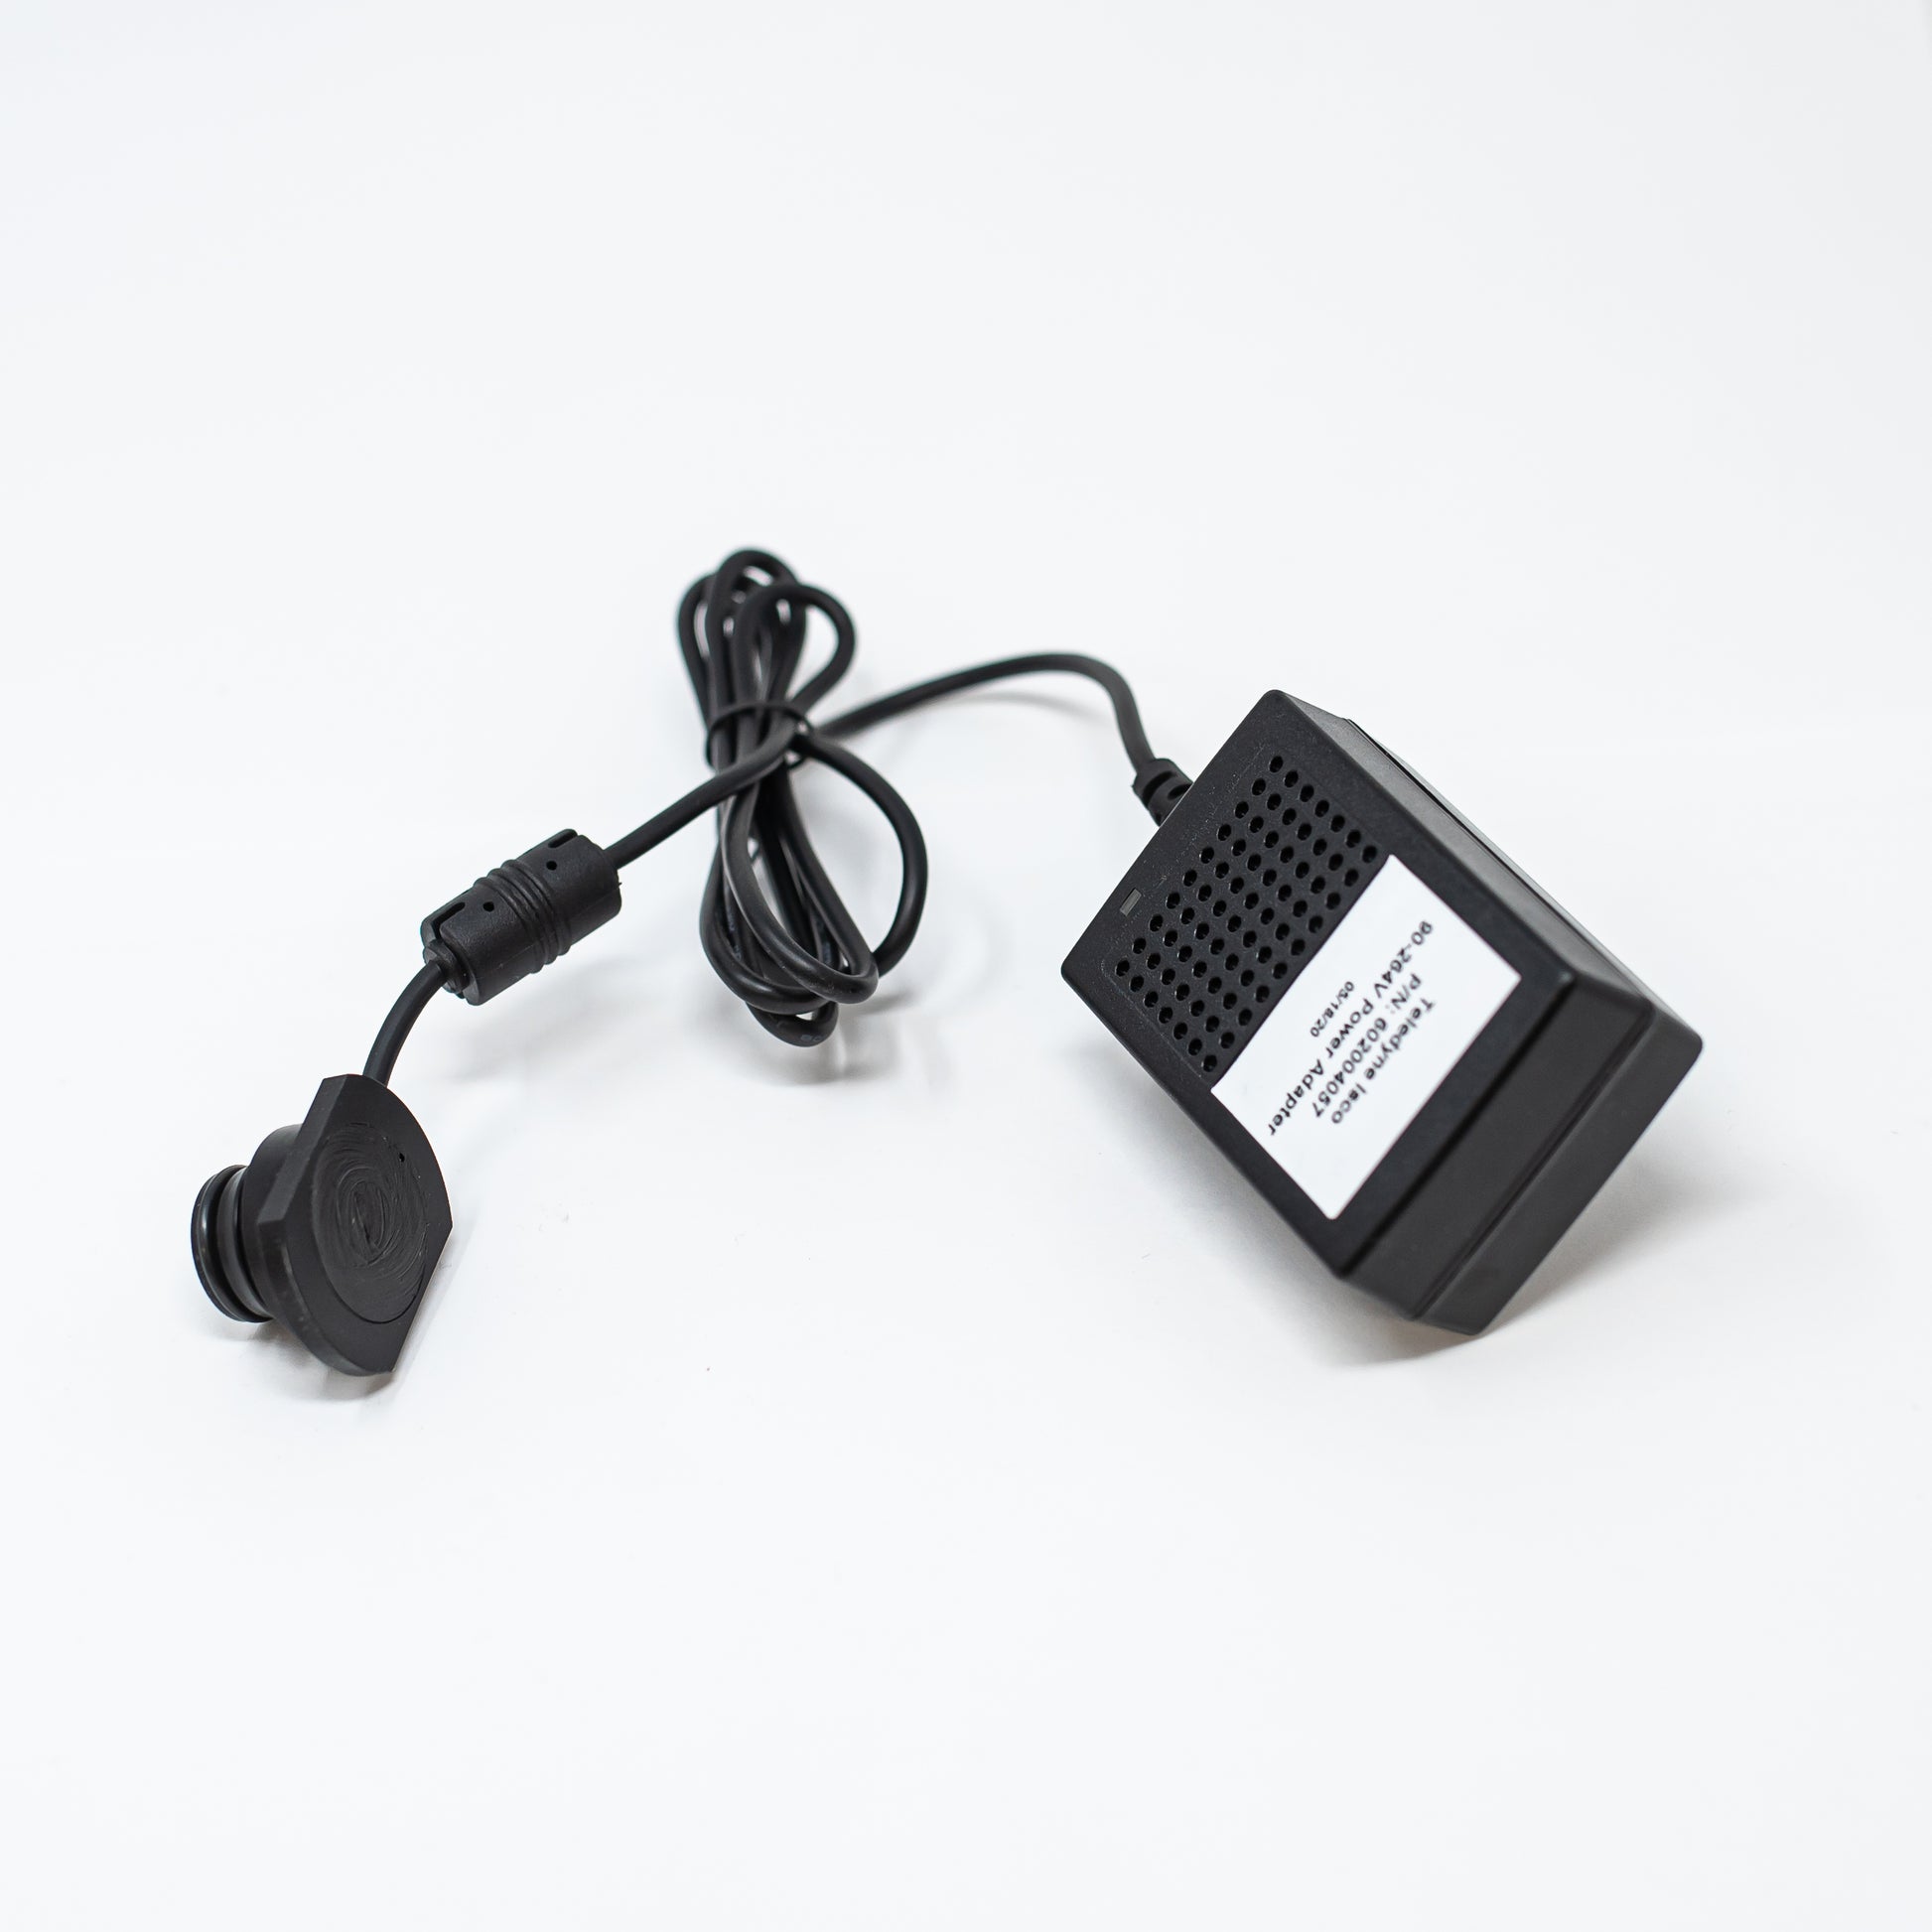 Plug-in power adapter with cord and connector